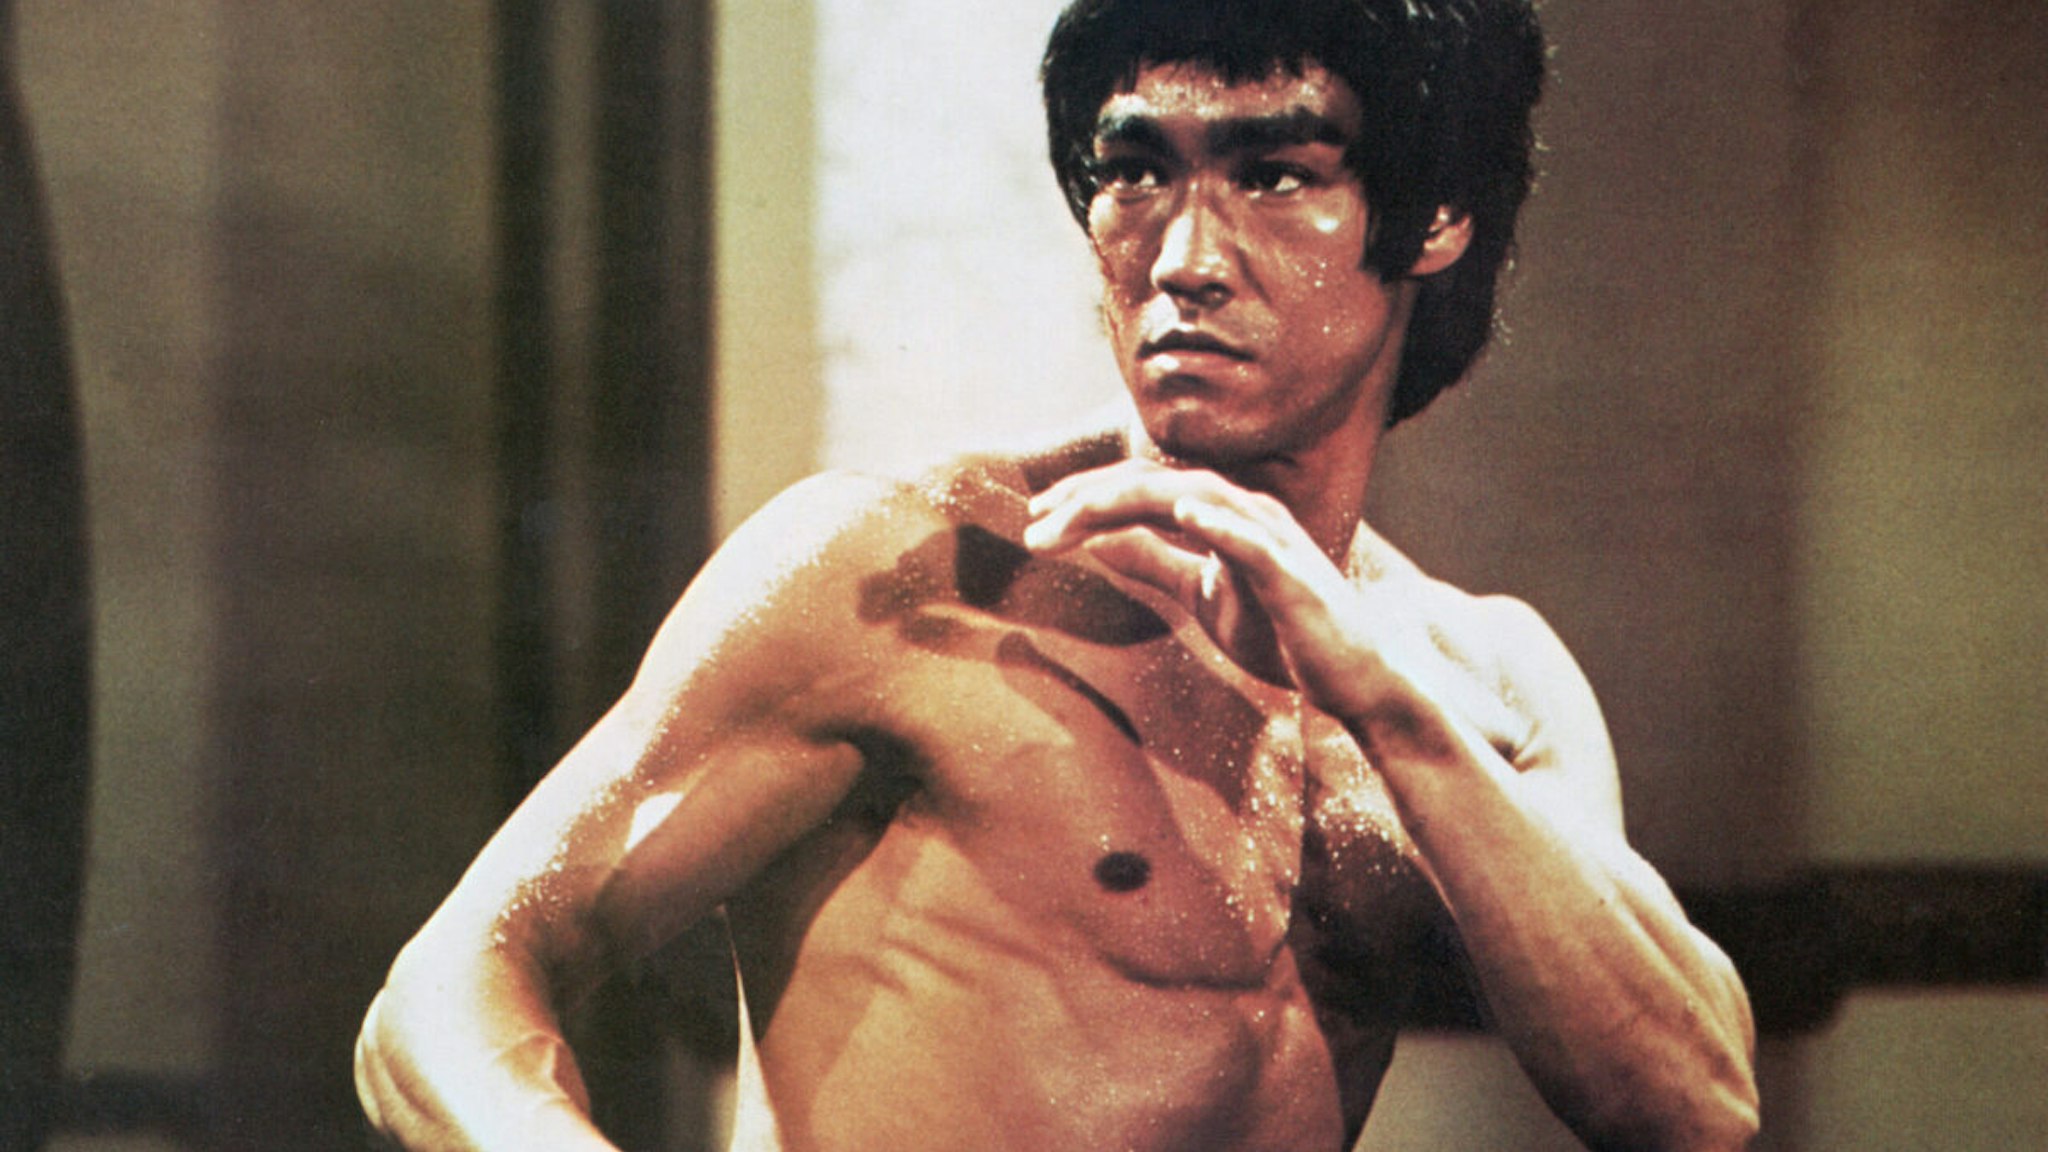 Chinese-American martial arts exponent Bruce Lee (1940 - 1973), in a karate stance, early 1970s